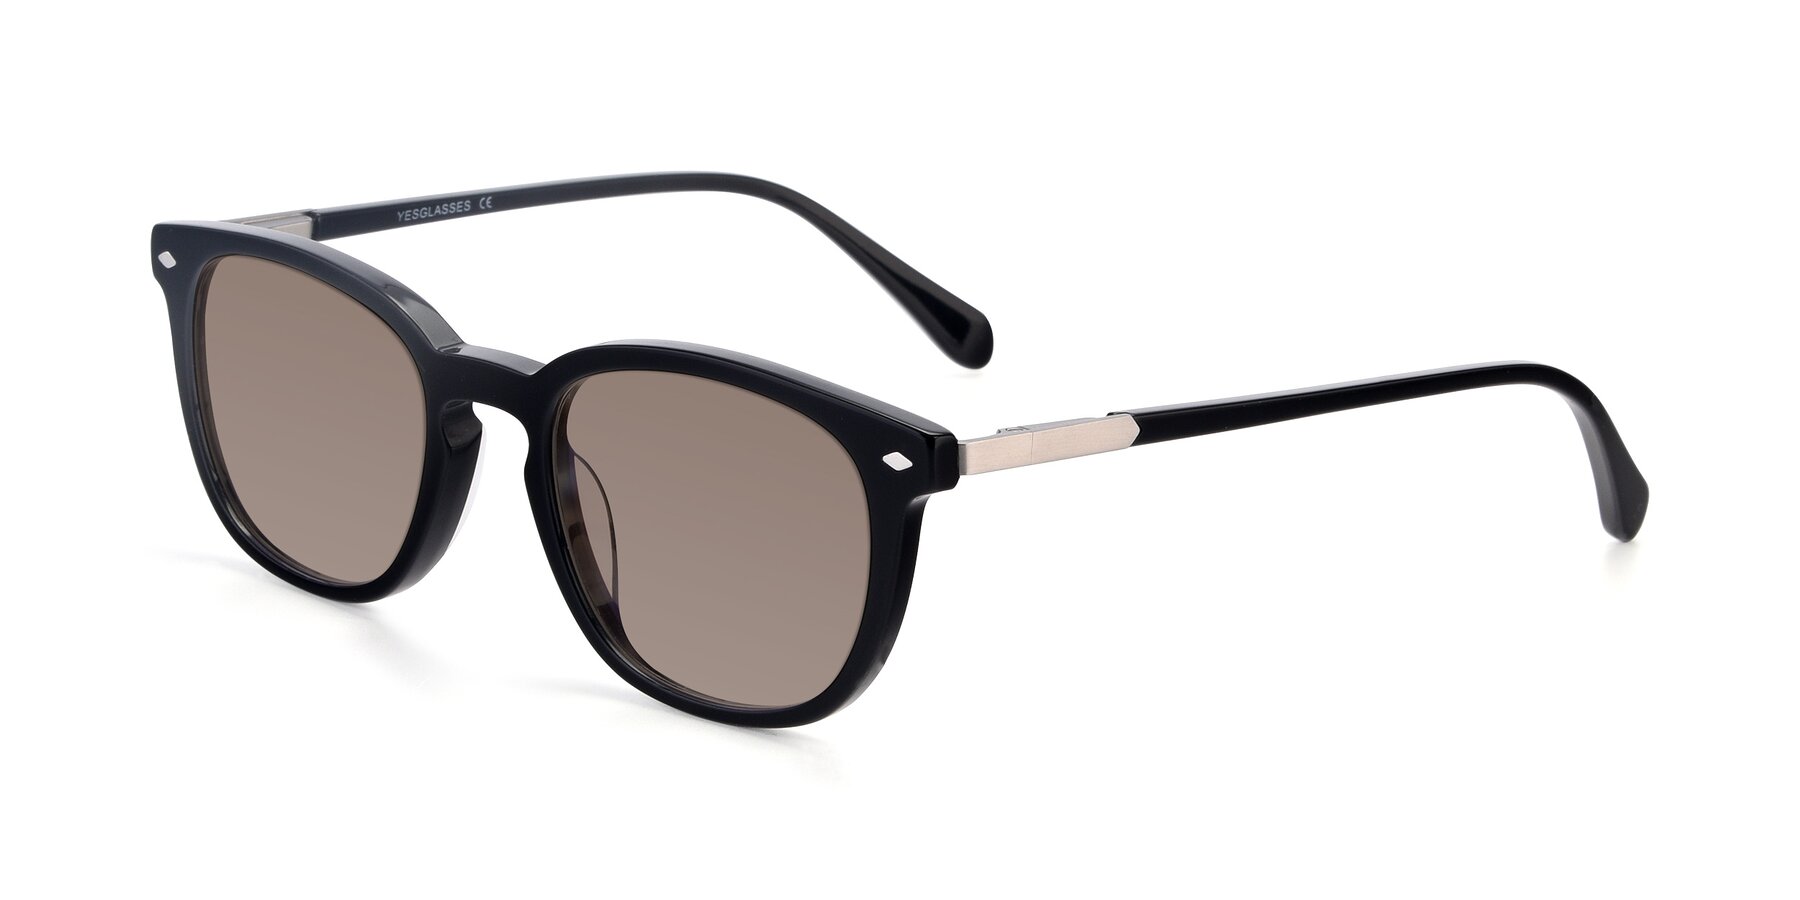 Angle of 17578 in Black with Medium Brown Tinted Lenses